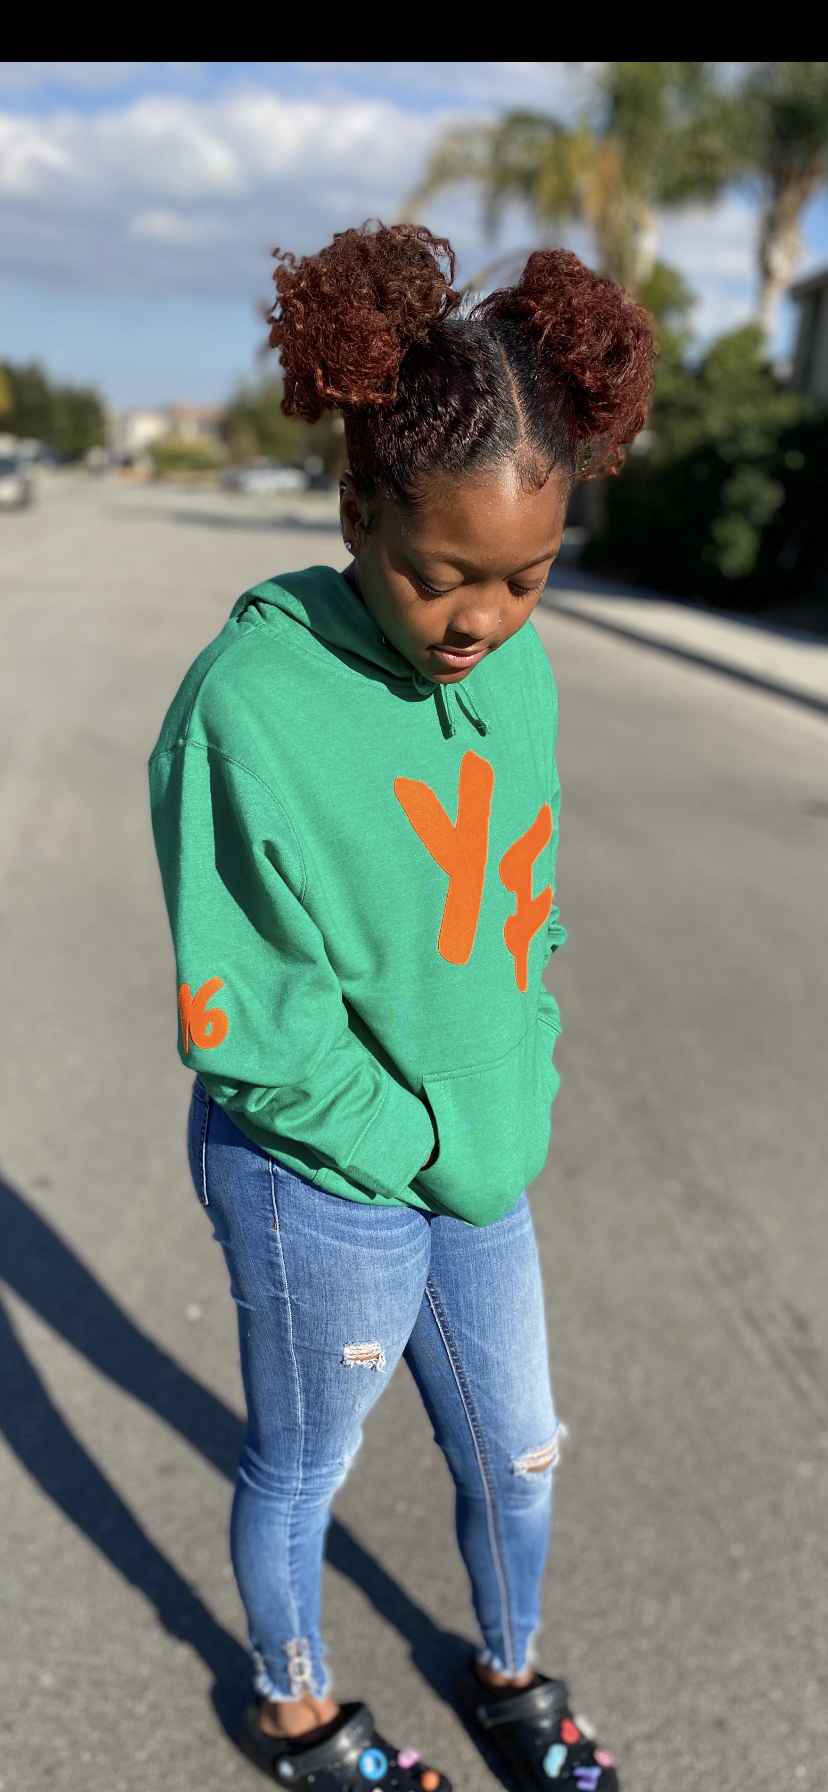 YOUNG FASHION "GREEN DAY" HOODIE